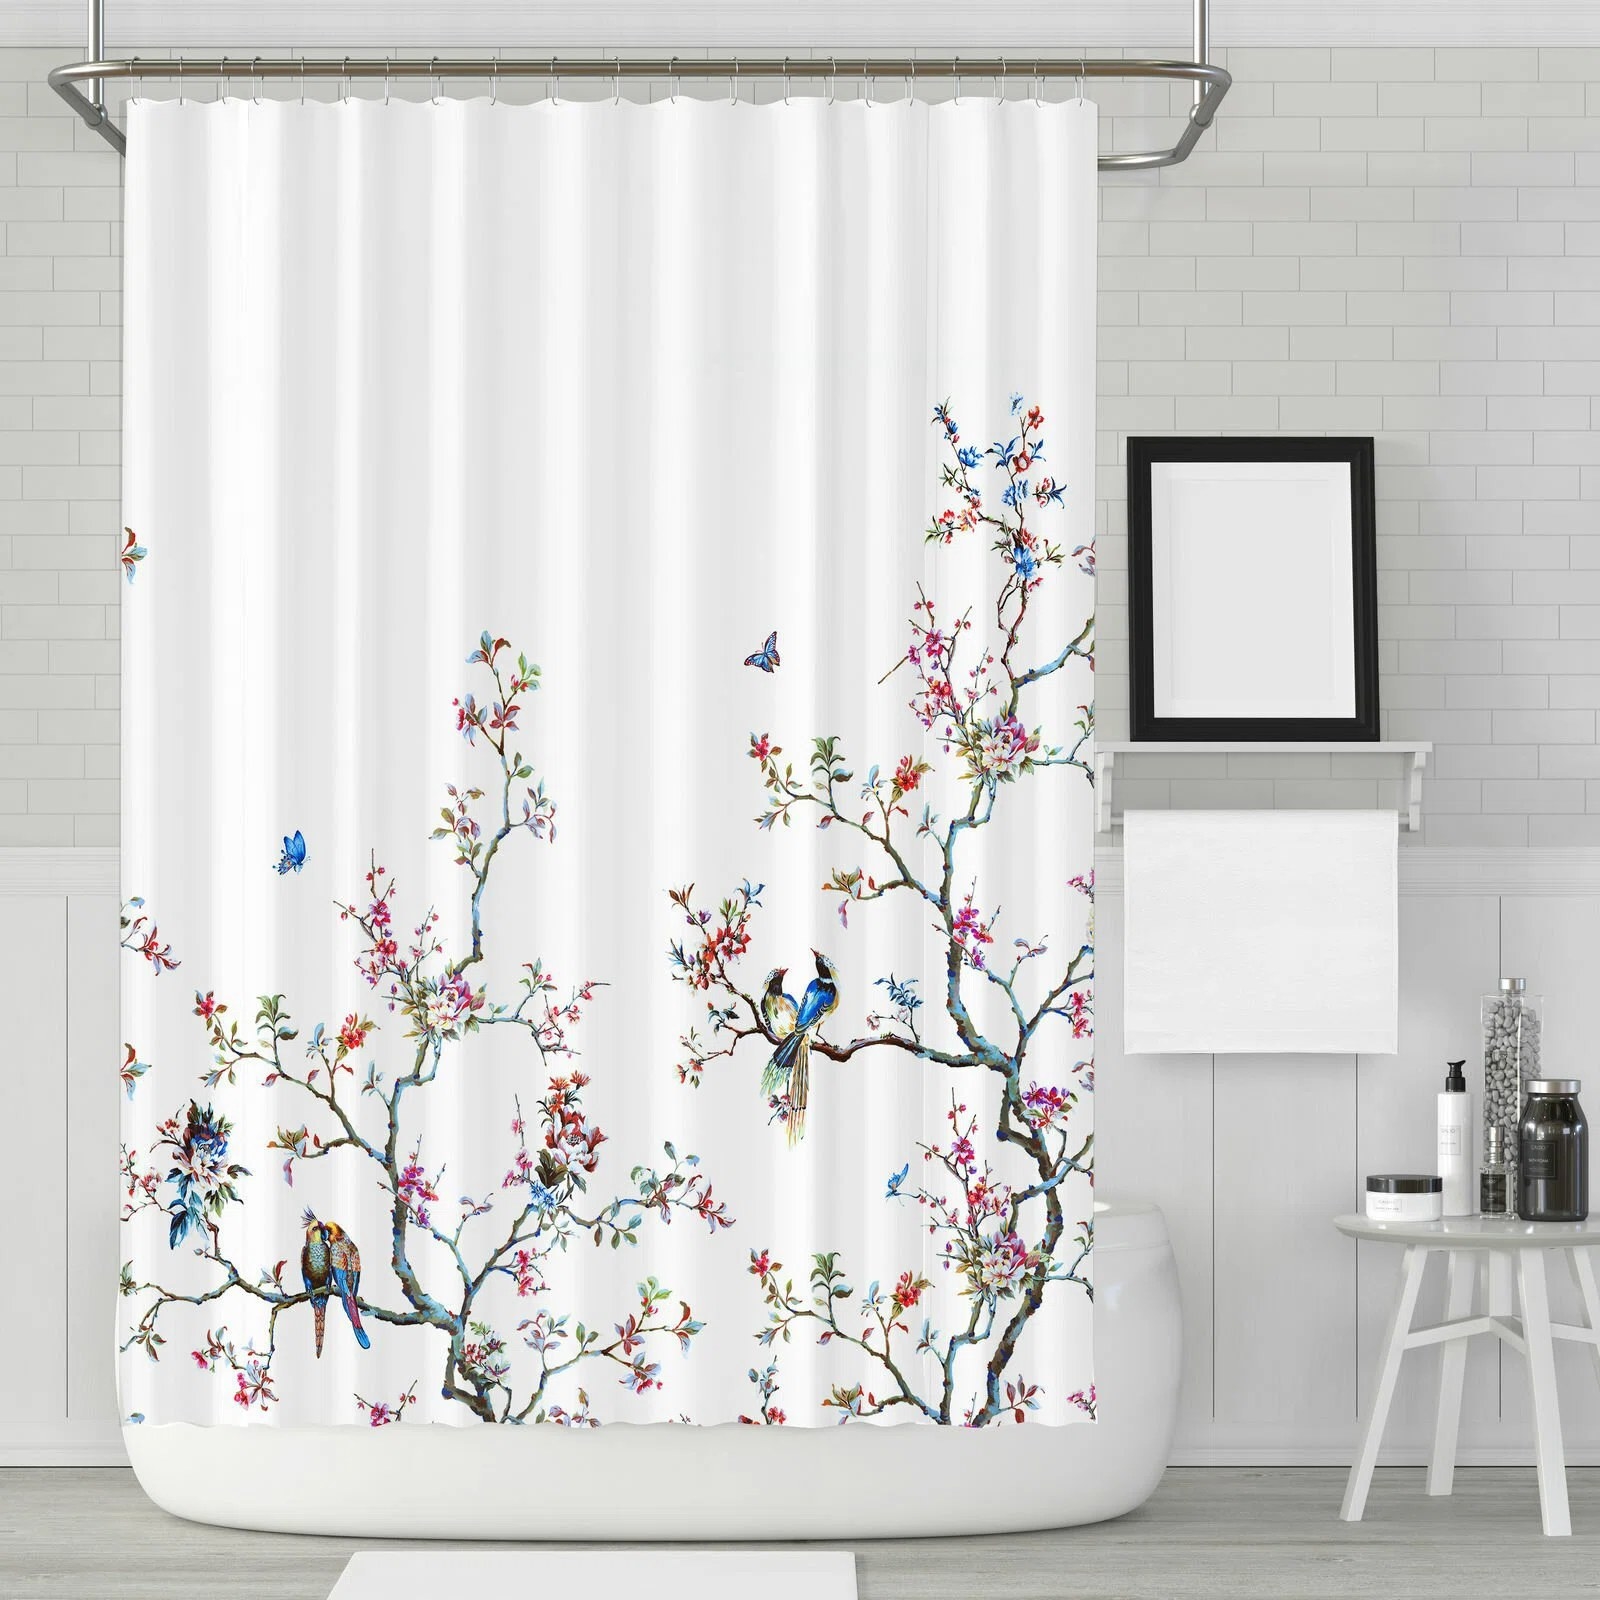 The shower curtain with a colorful print that includes delicate flowers and birds